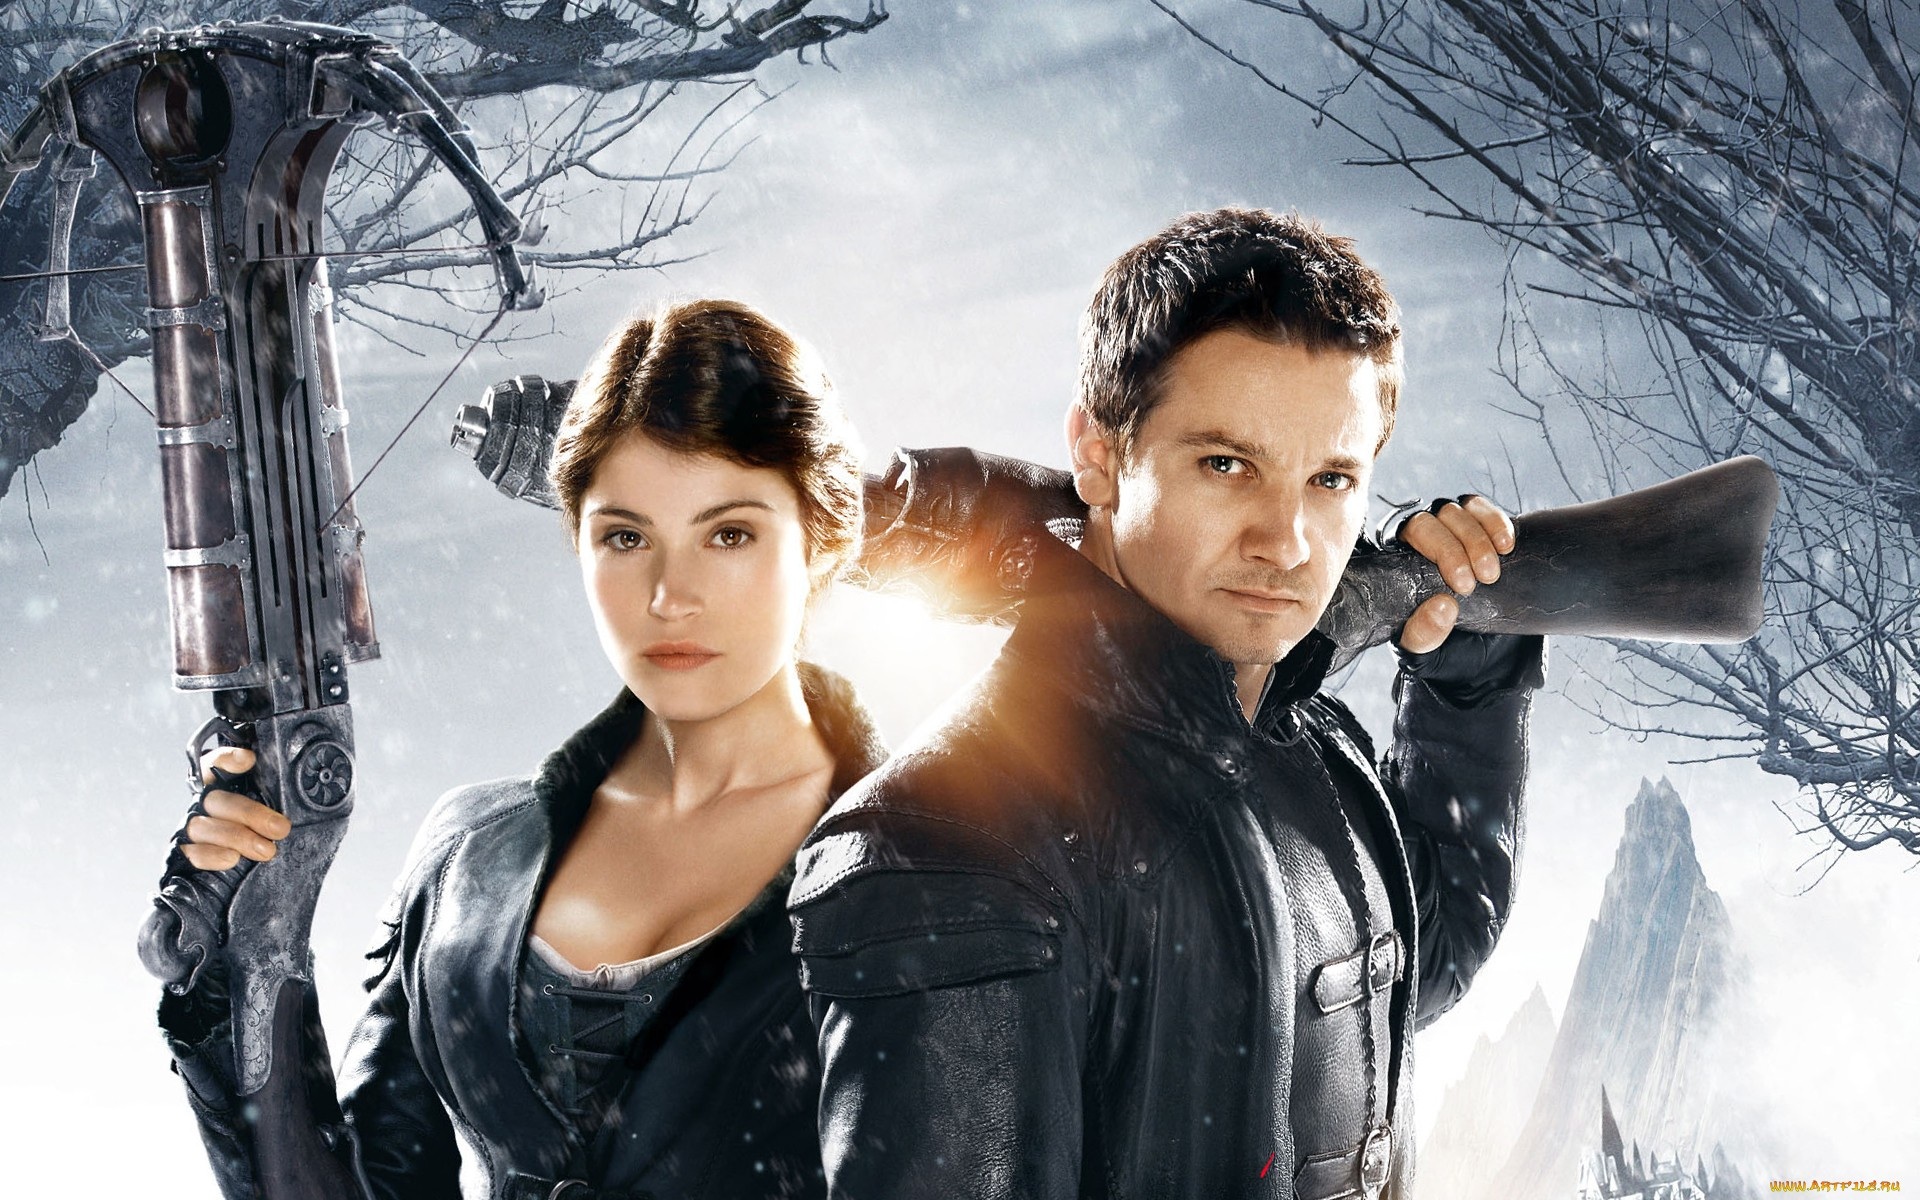 Hansel and Gretel: Witch hunters Blu-ray Steelbook will be released in the UK as an Entertainment Store Exclusive